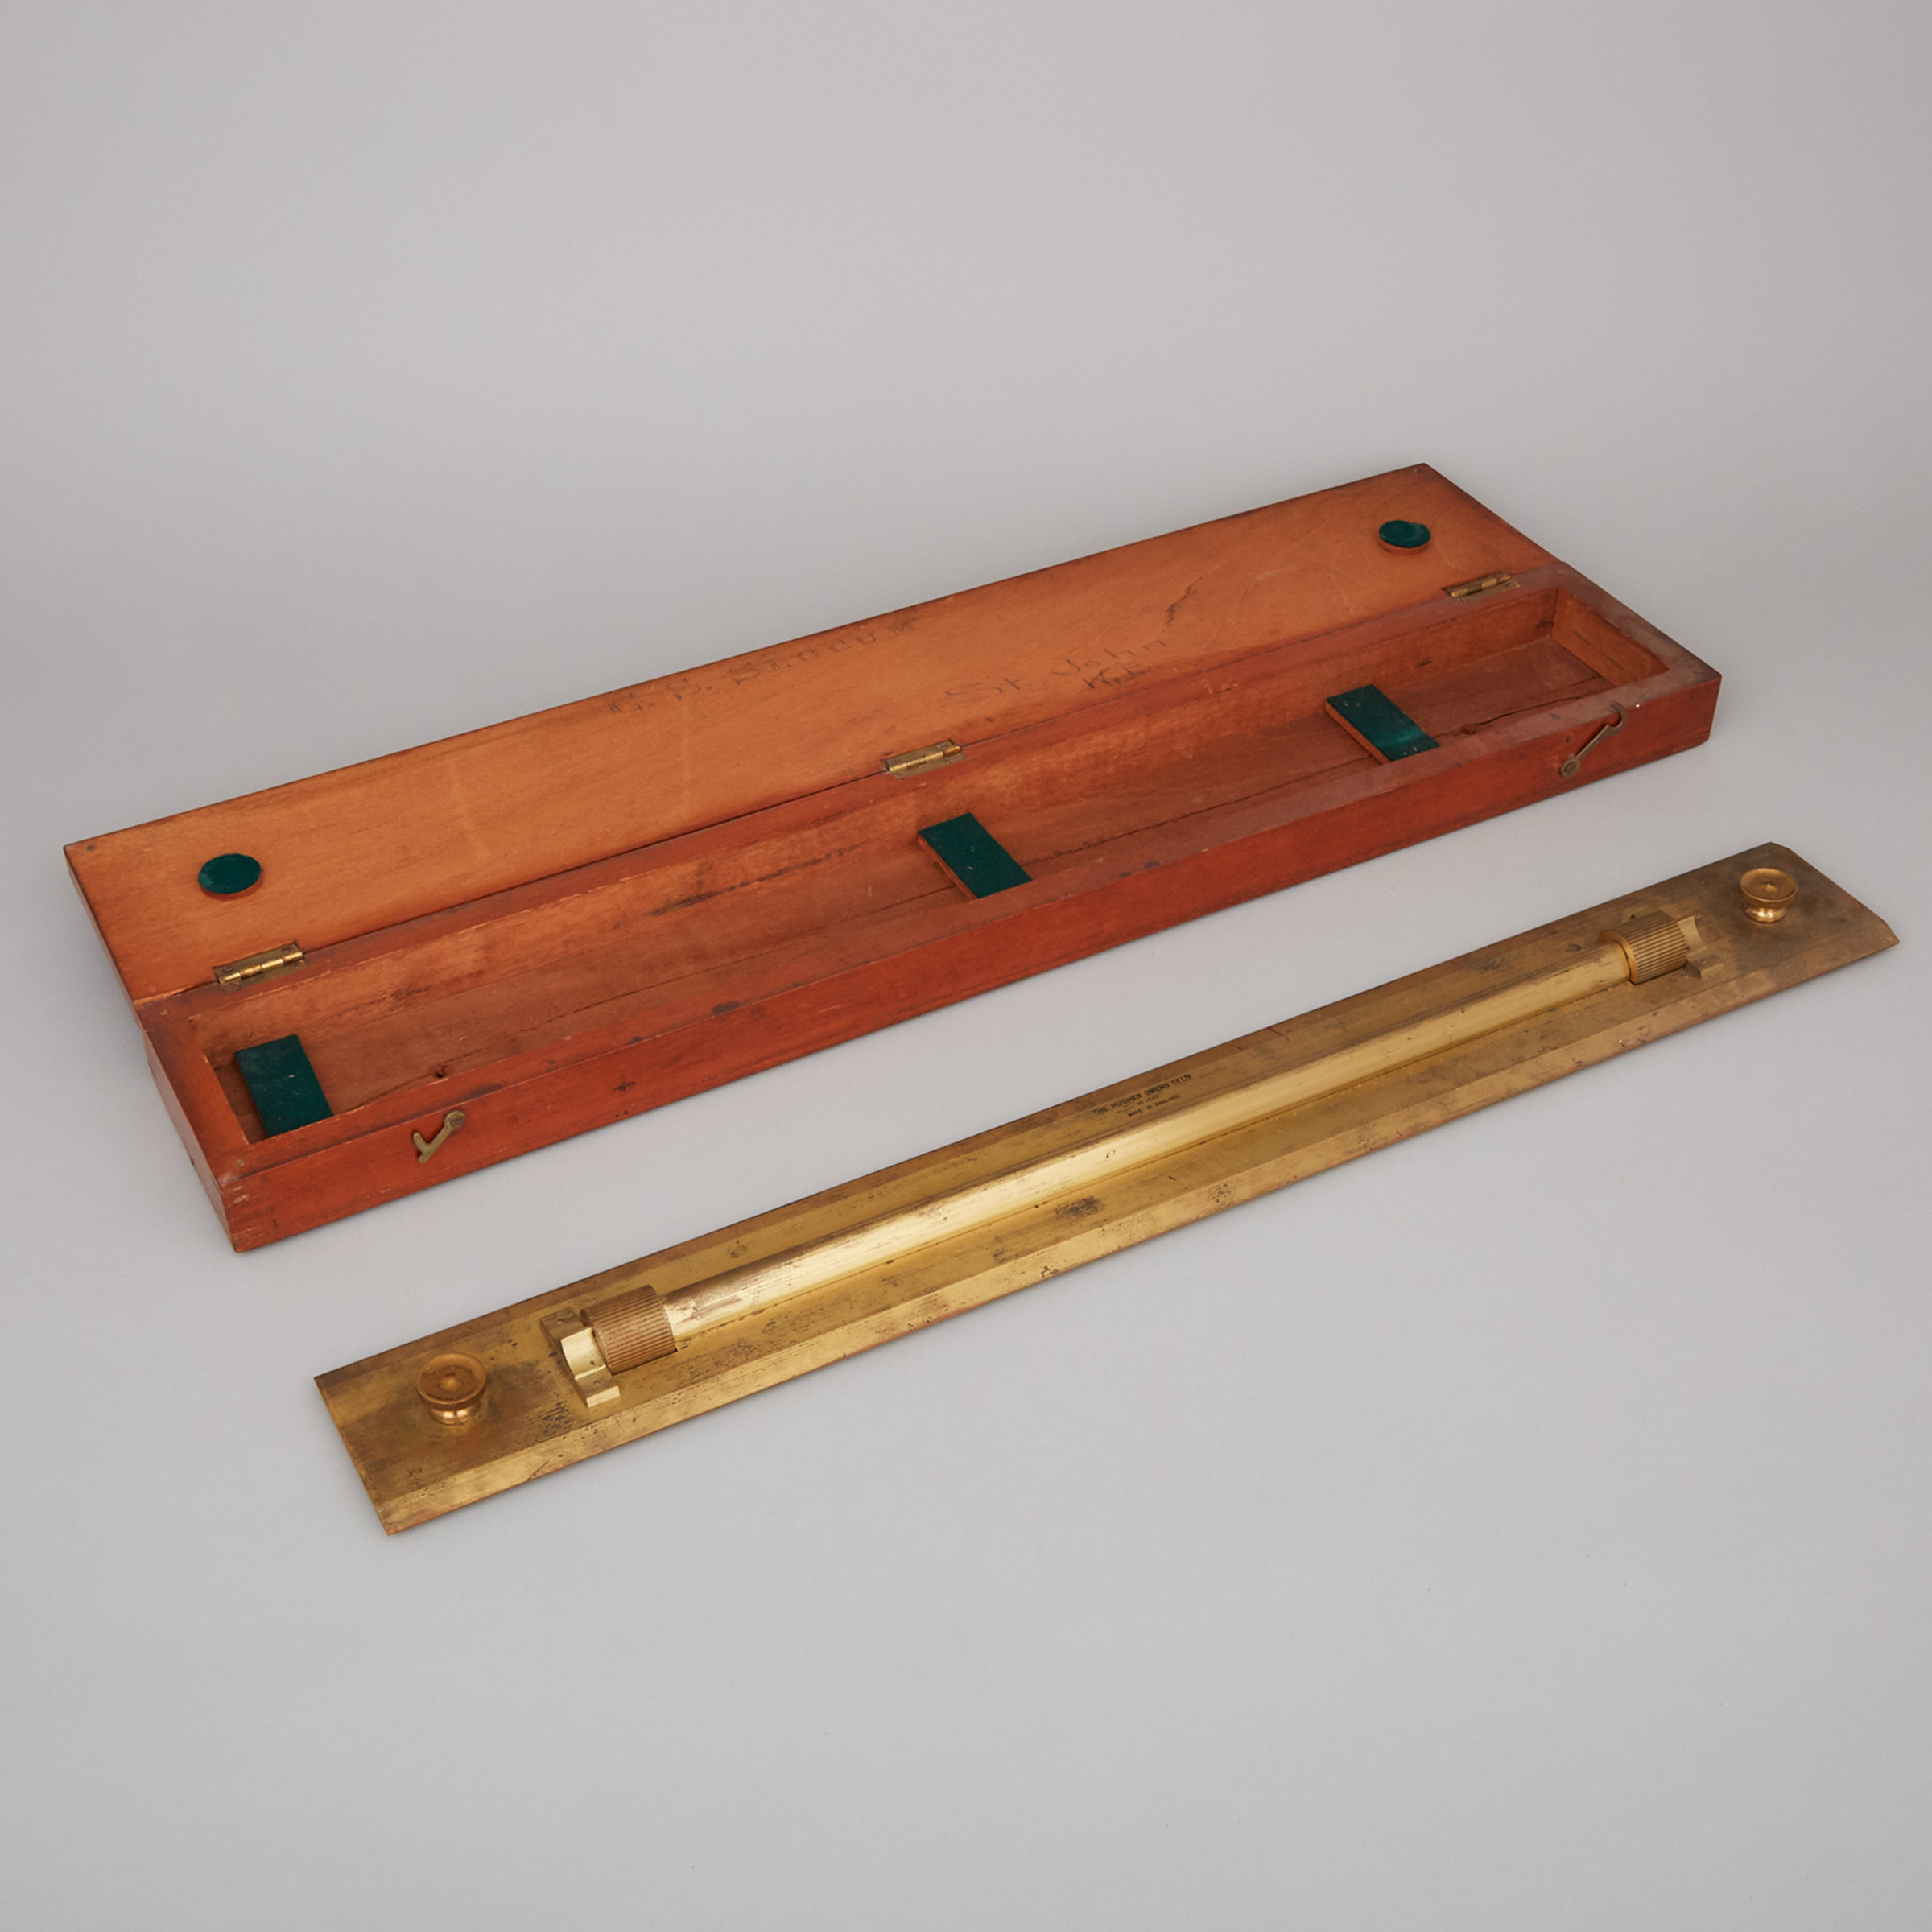 Large Marine Navigation Lacquered Brass Parallel Rolling Rule, The Hughes Owens Co. Ltd., 19th century